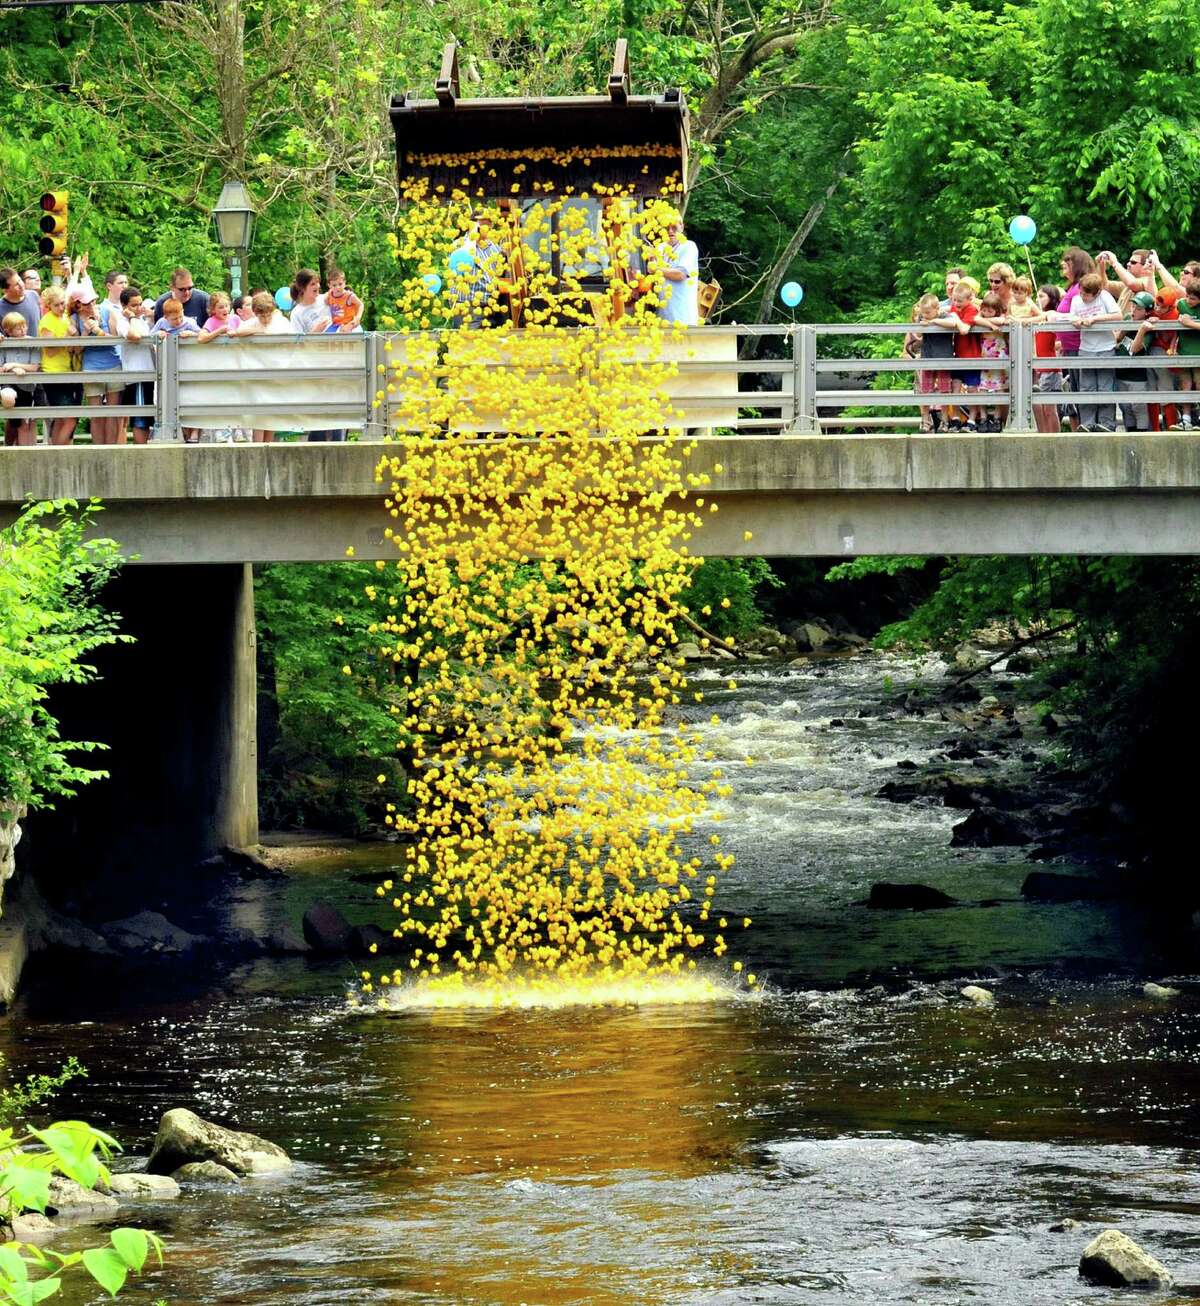 Four thousand plastic ducks hit the waters of the Pootatuck River in Sandy Hook during the annual Great Pootatuck Duck Race. This year the Newtown Lions event will be Saturday, May 25.